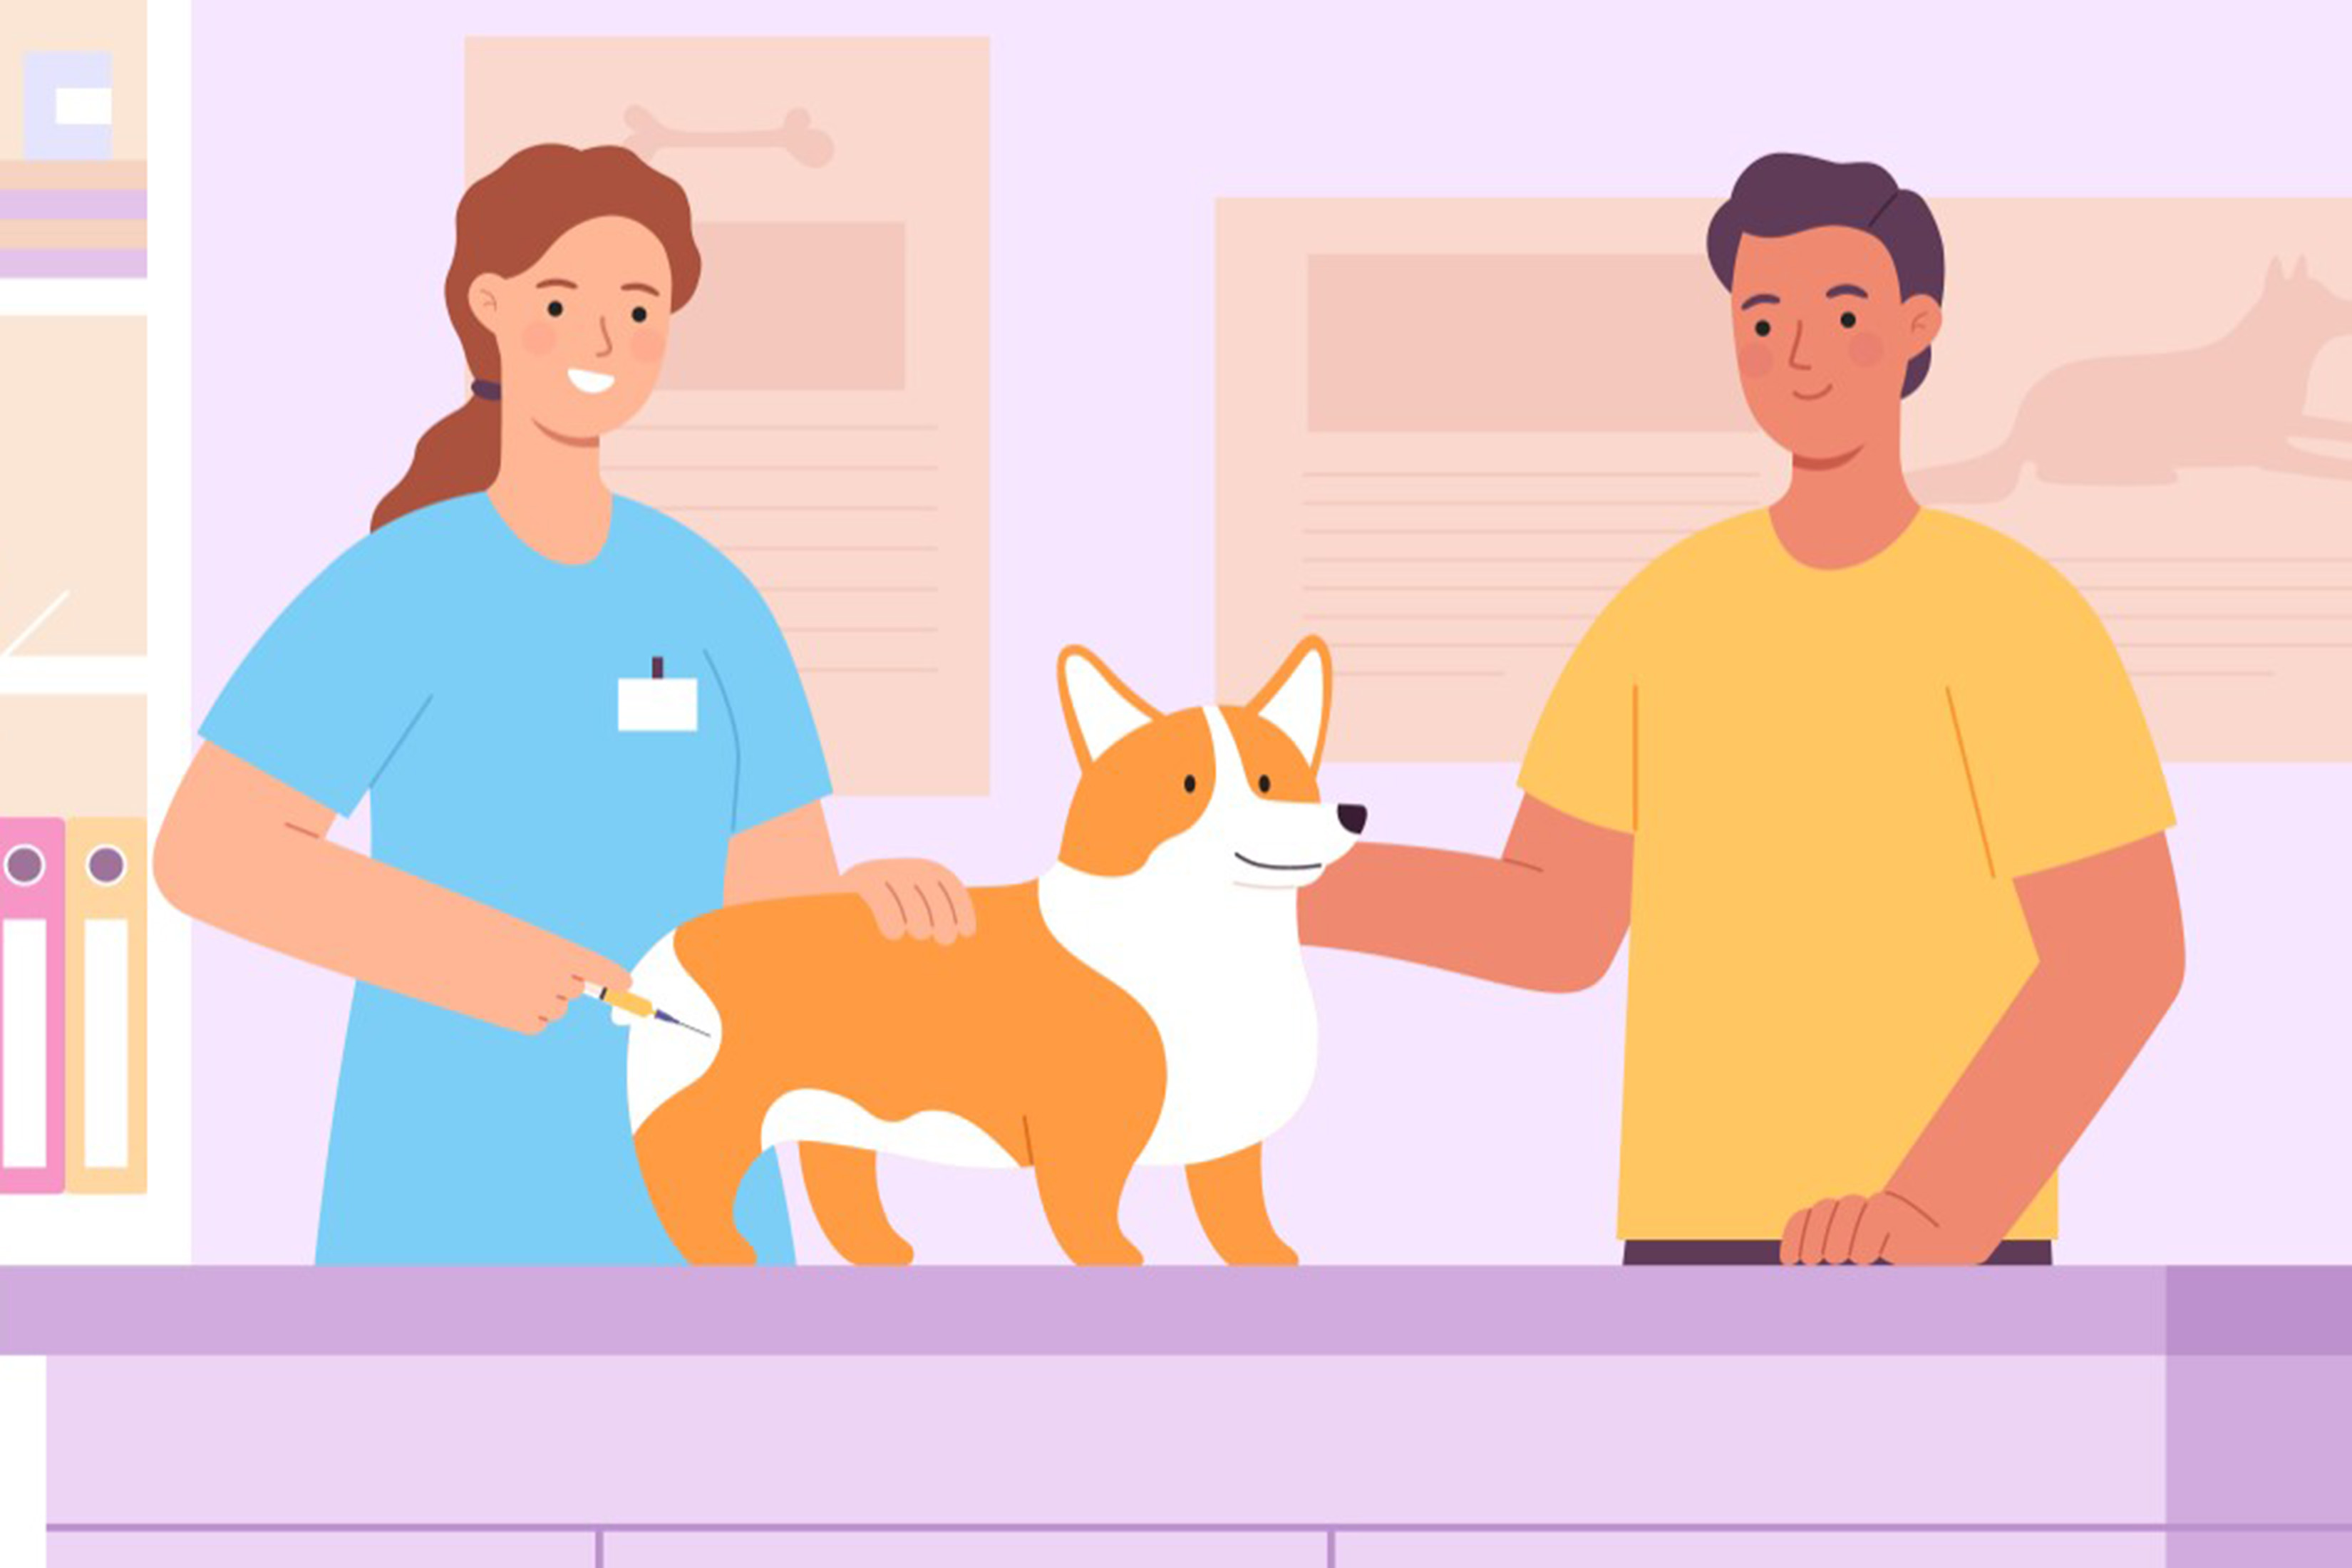 Illustration depicts a dog getting a shot from a woman in blue scrubs while a man pets the dog's head.